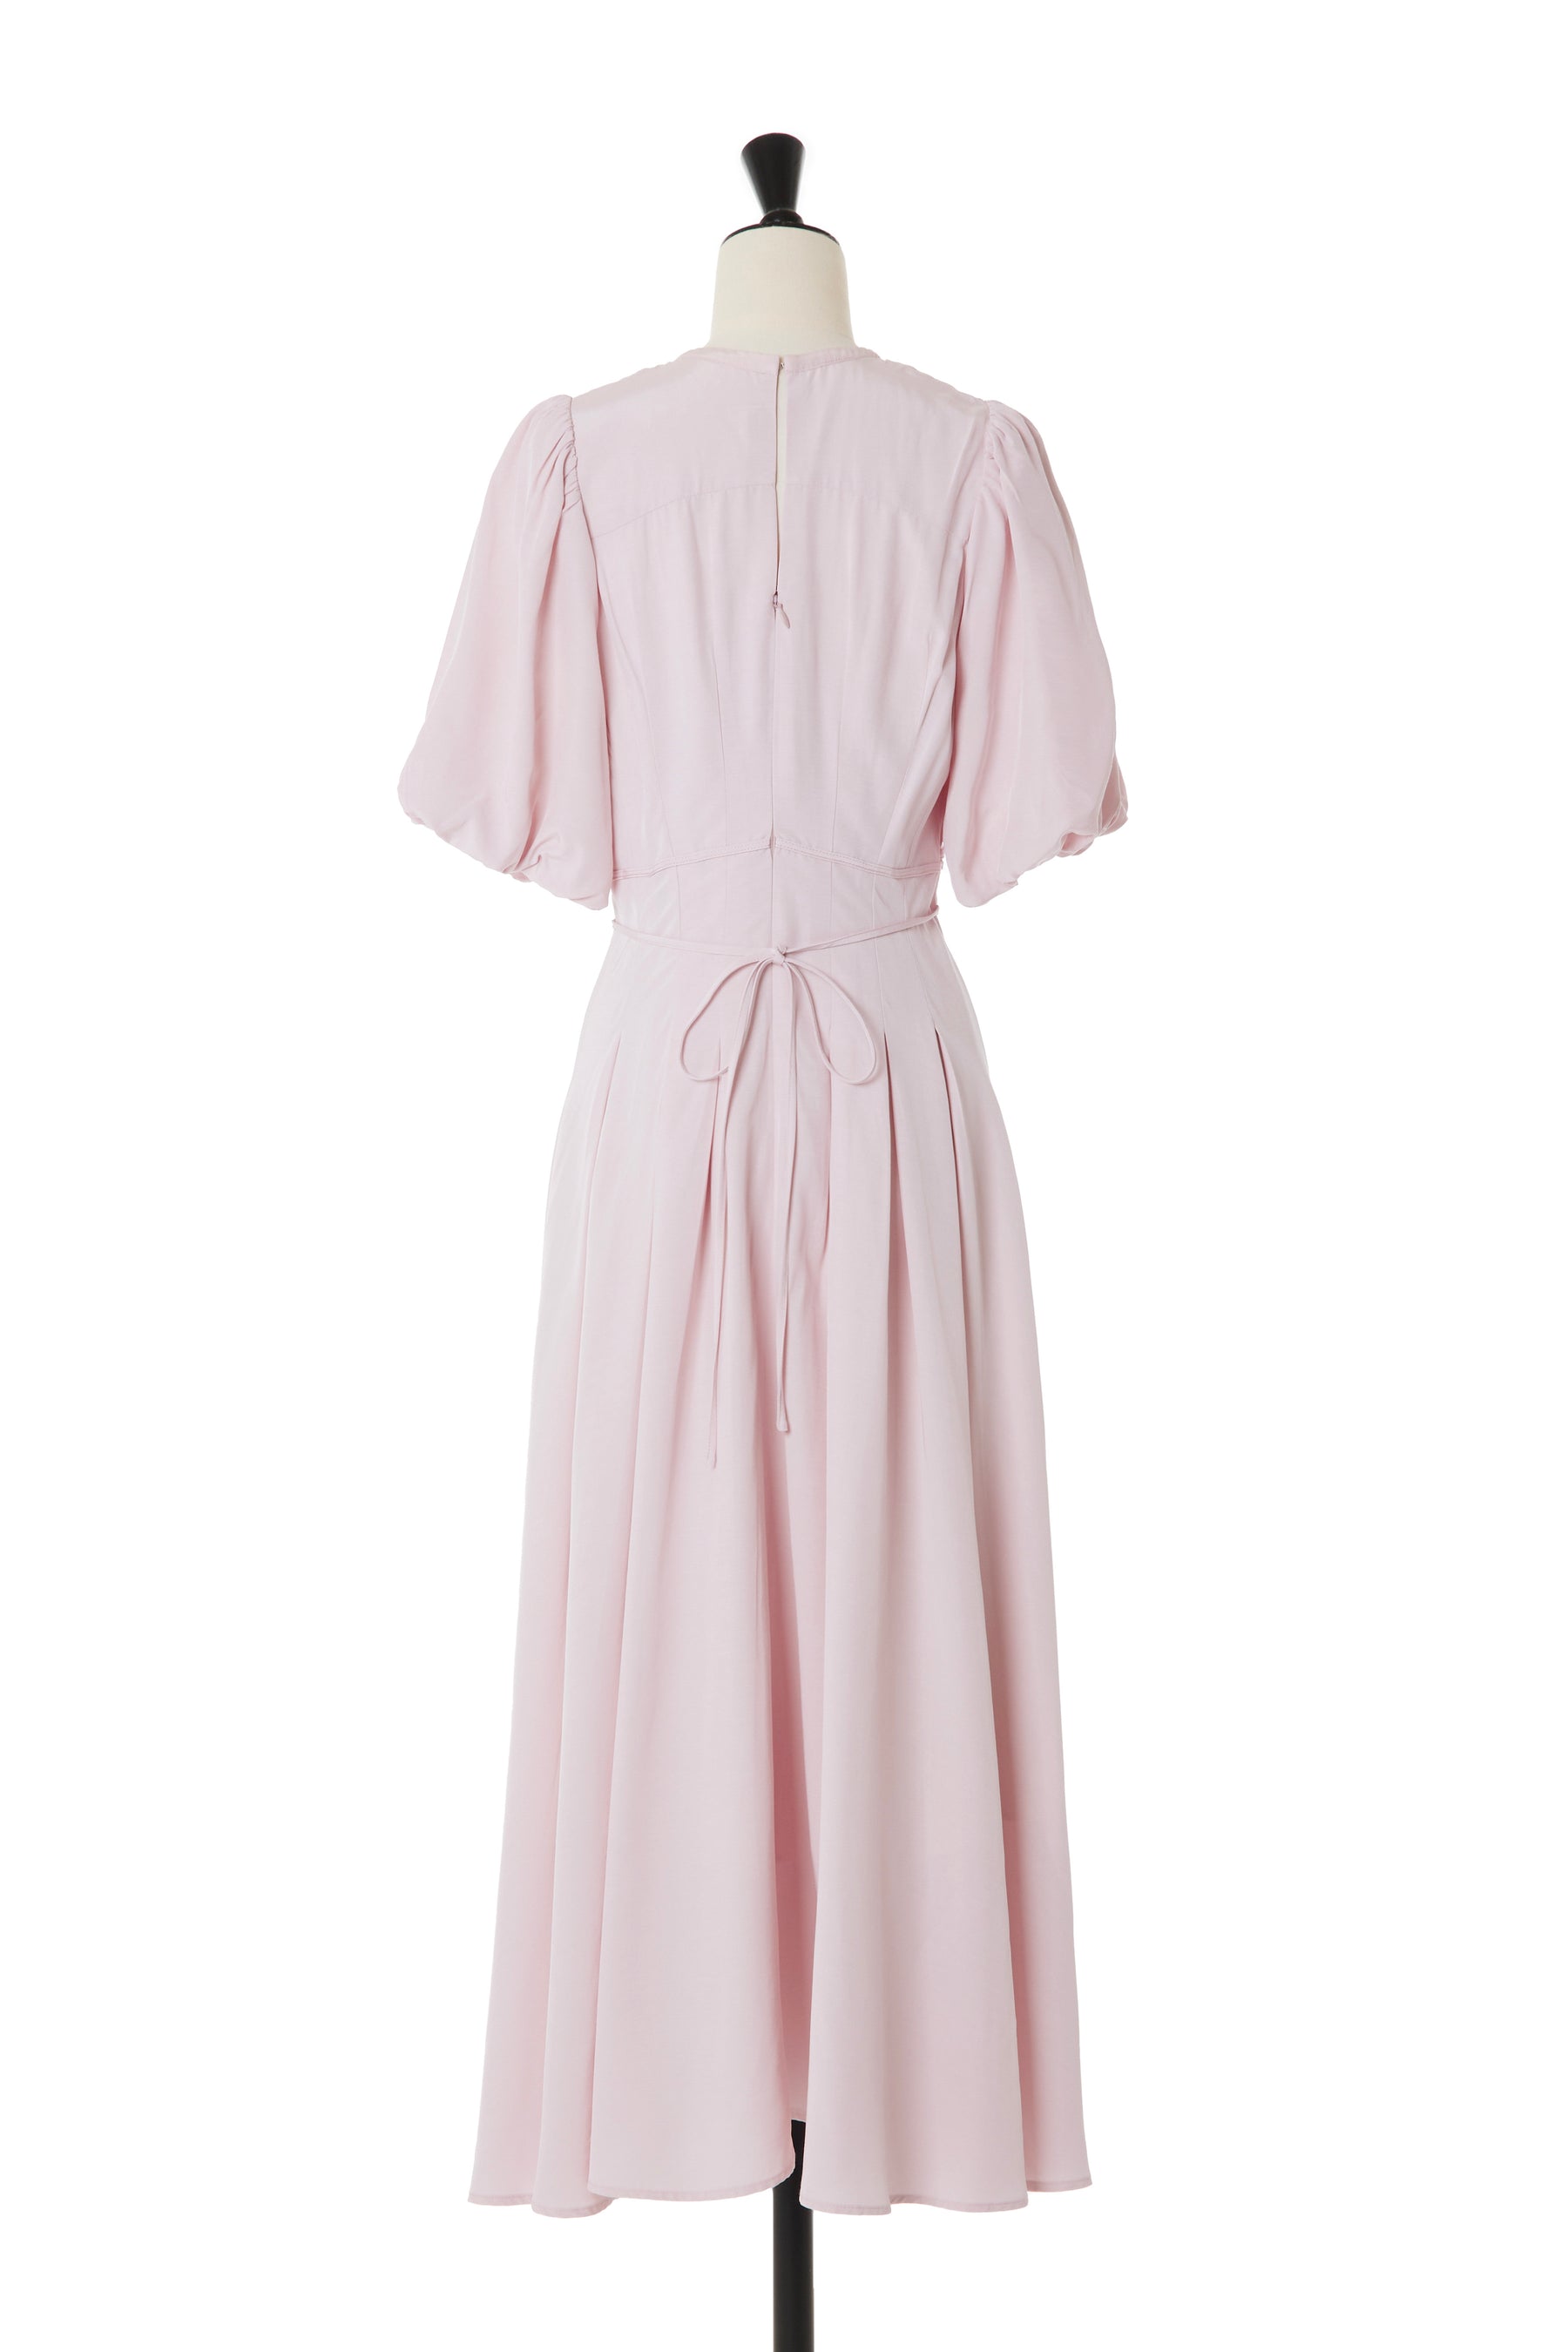 sakura pink] [Shipping in early May] Fountain Lace Up Bow Dress